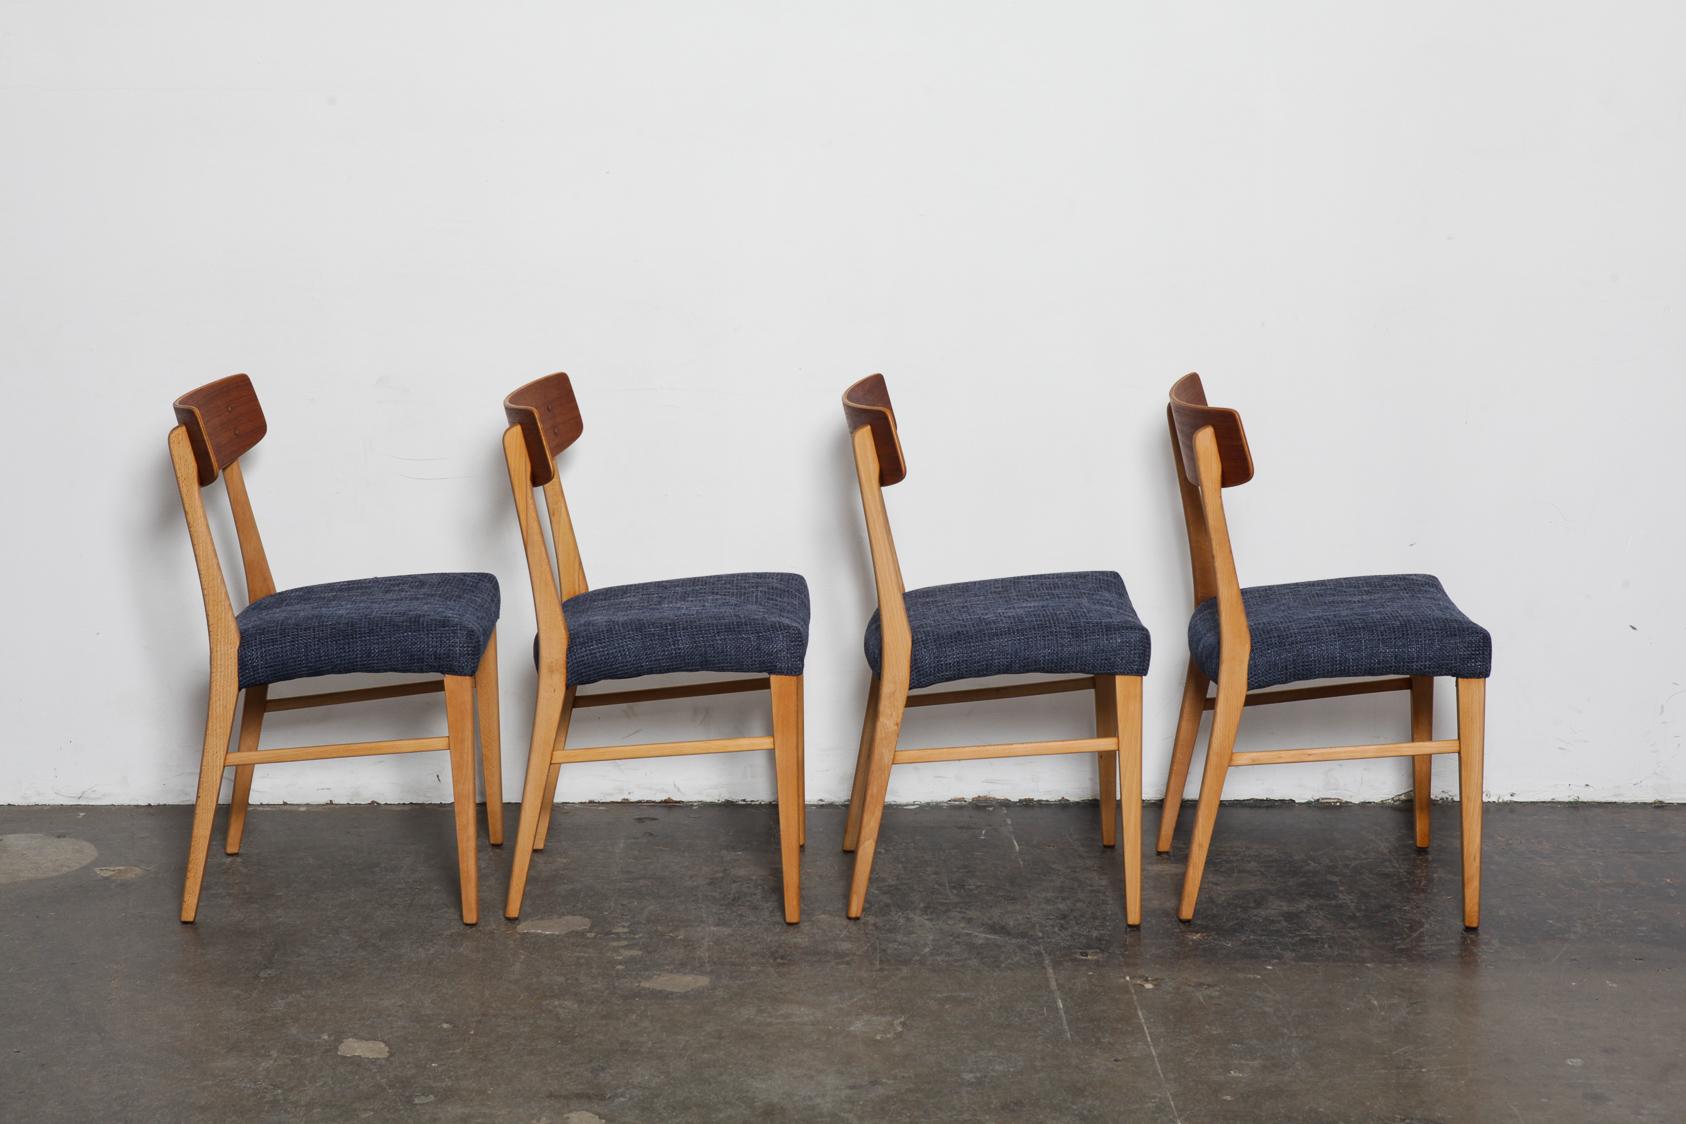 Mid-Century Modern Set of 4 Teak and Beech 1950s Danish Modern Dining Chairs with Navy Seats